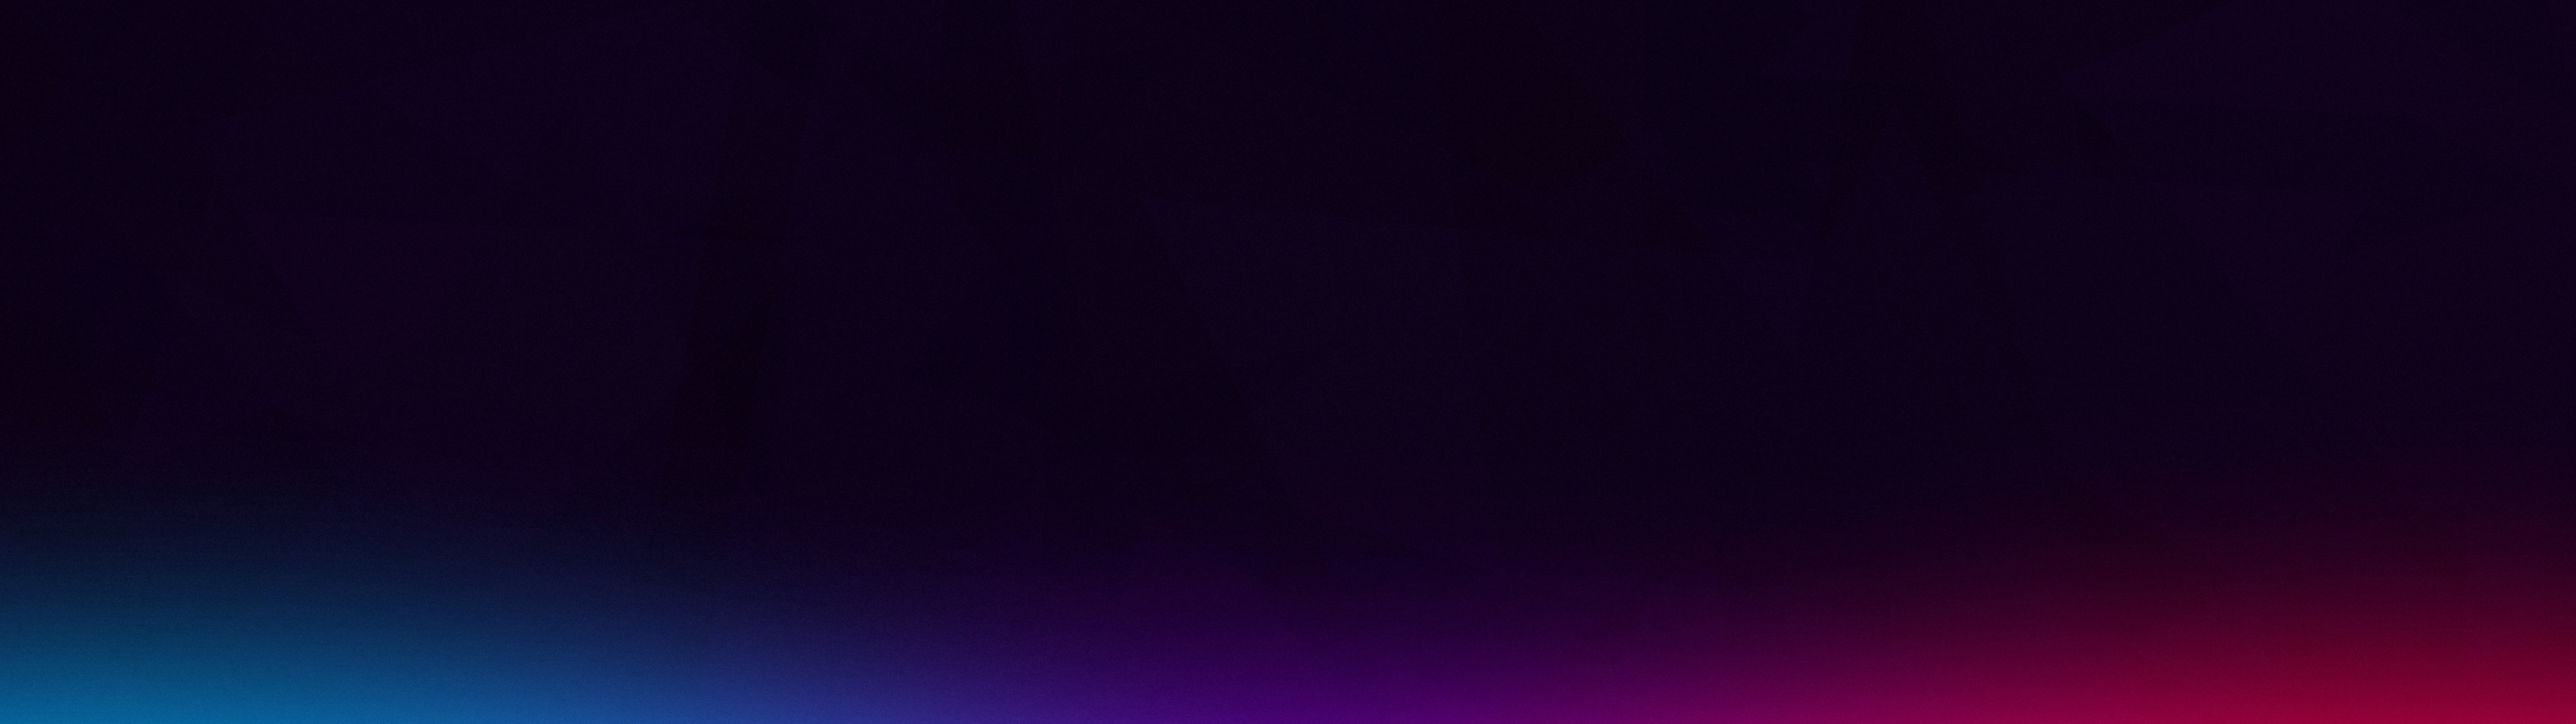 5120x1440 Neon Gradient Minimalist 5120x1440 Resolution Wallpaper, HD  Abstract 4K Wallpapers, Images, Photos and Background - Wallpapers Den